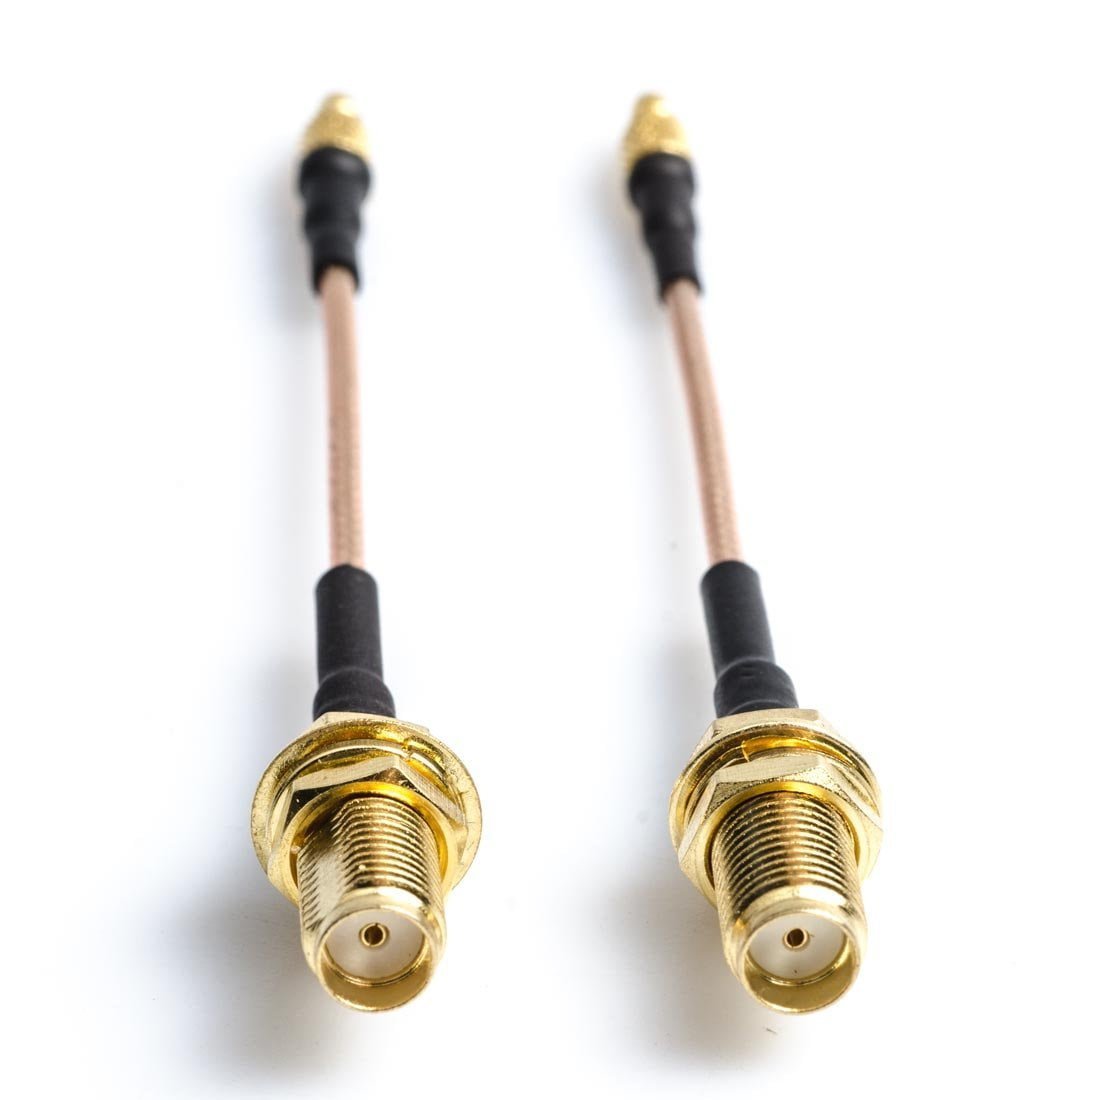 MMCX to SMA Female Low Loss FPV Antenna Extension Cable Adapter